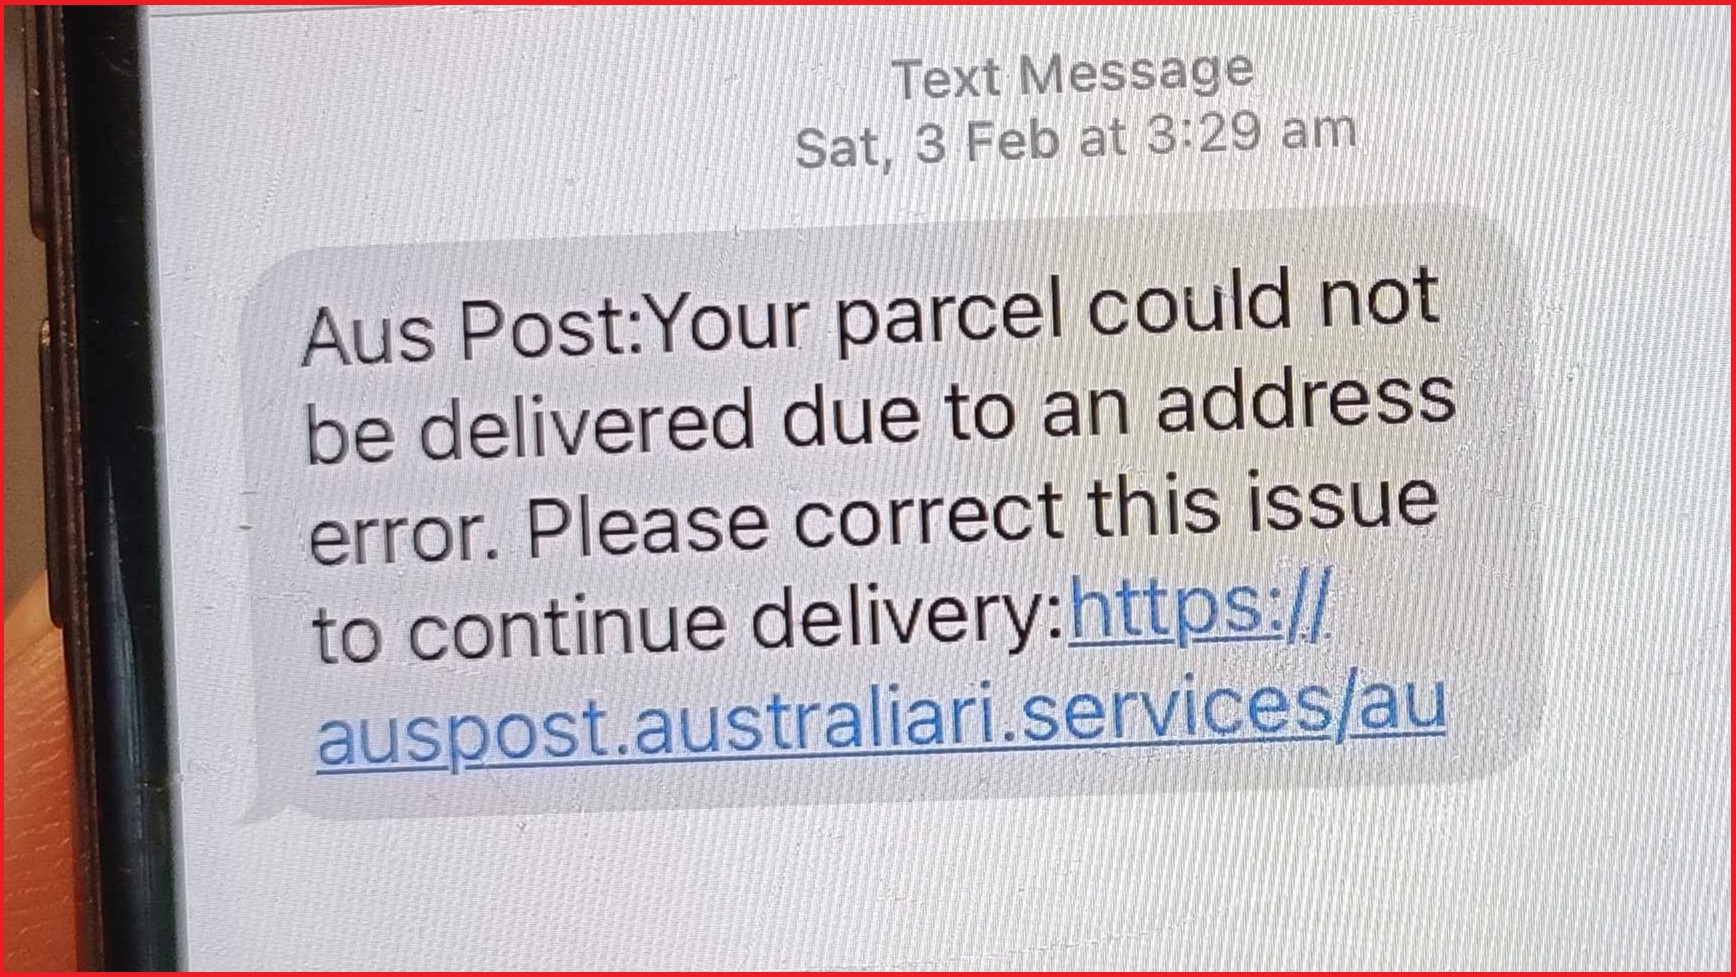 AusPost scam message on  mobile phone screen